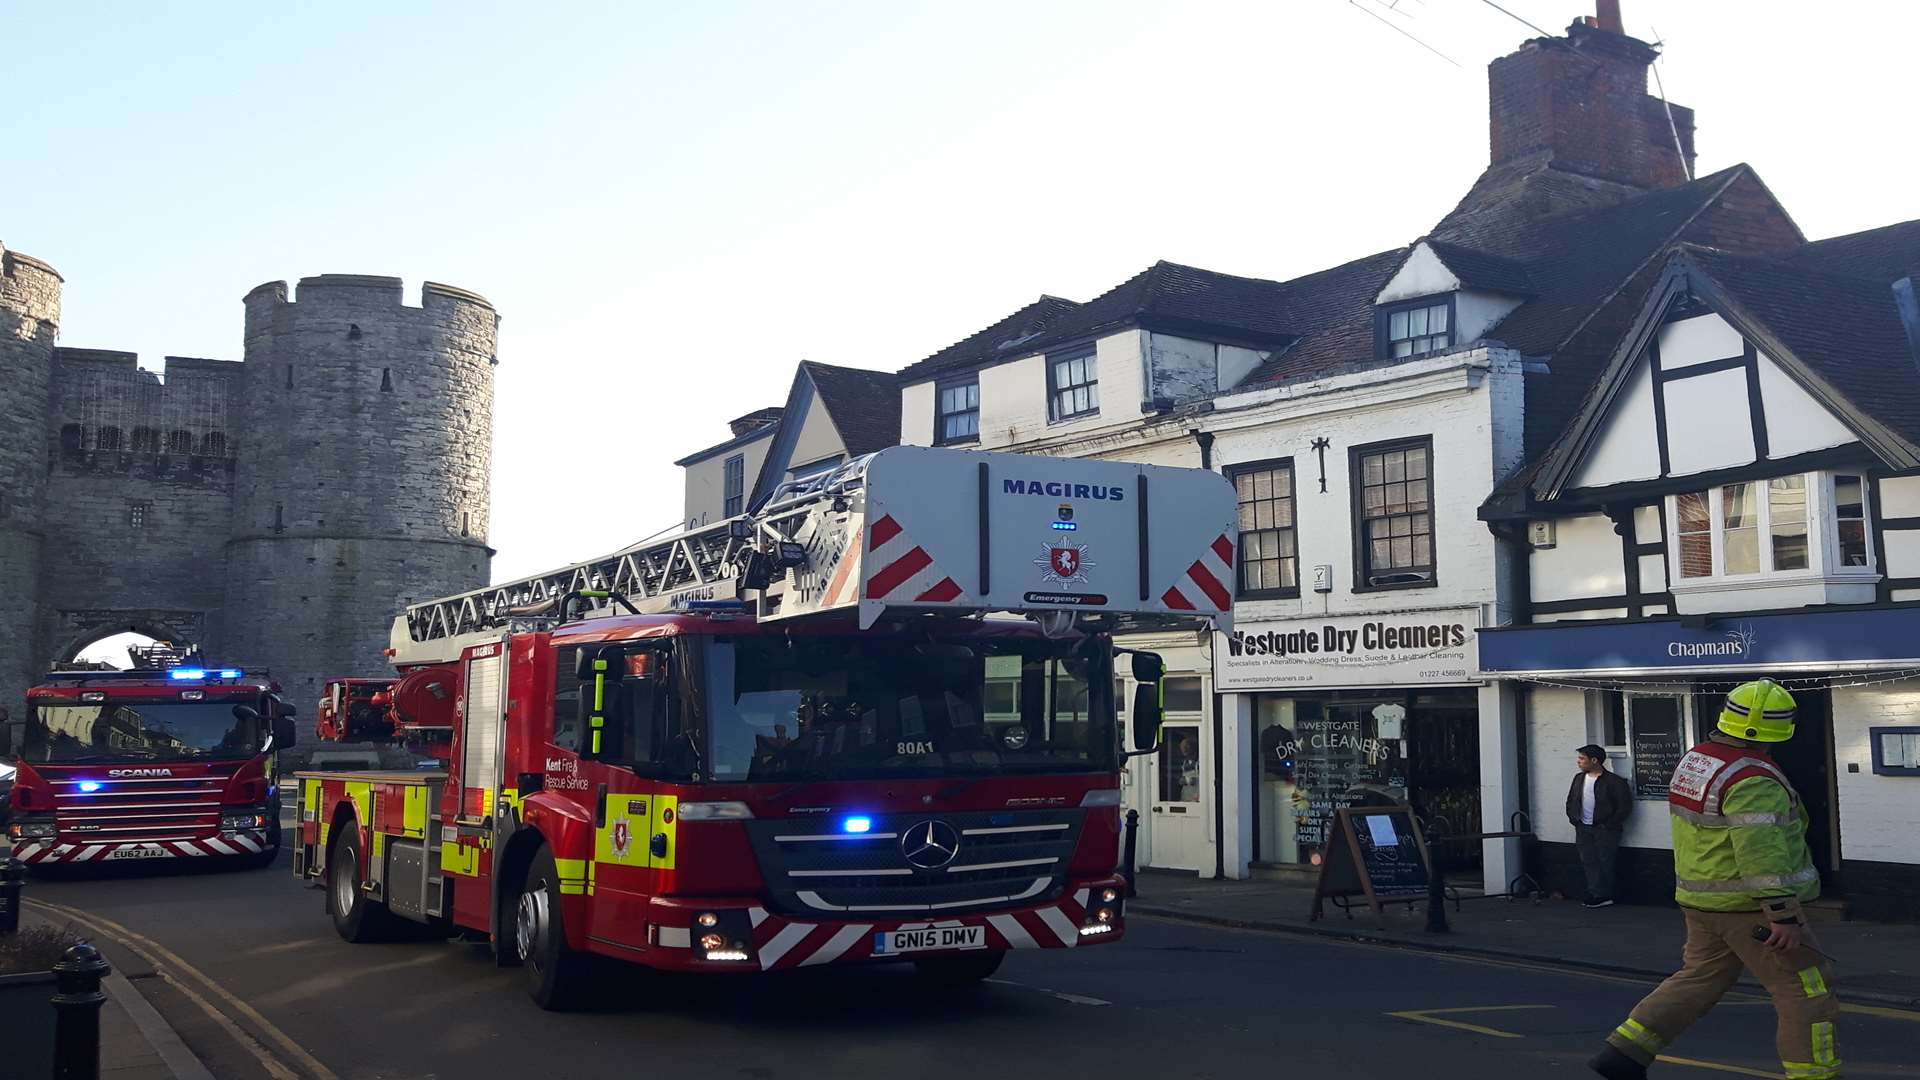 Reports or a chimney crashing into St Dunstans